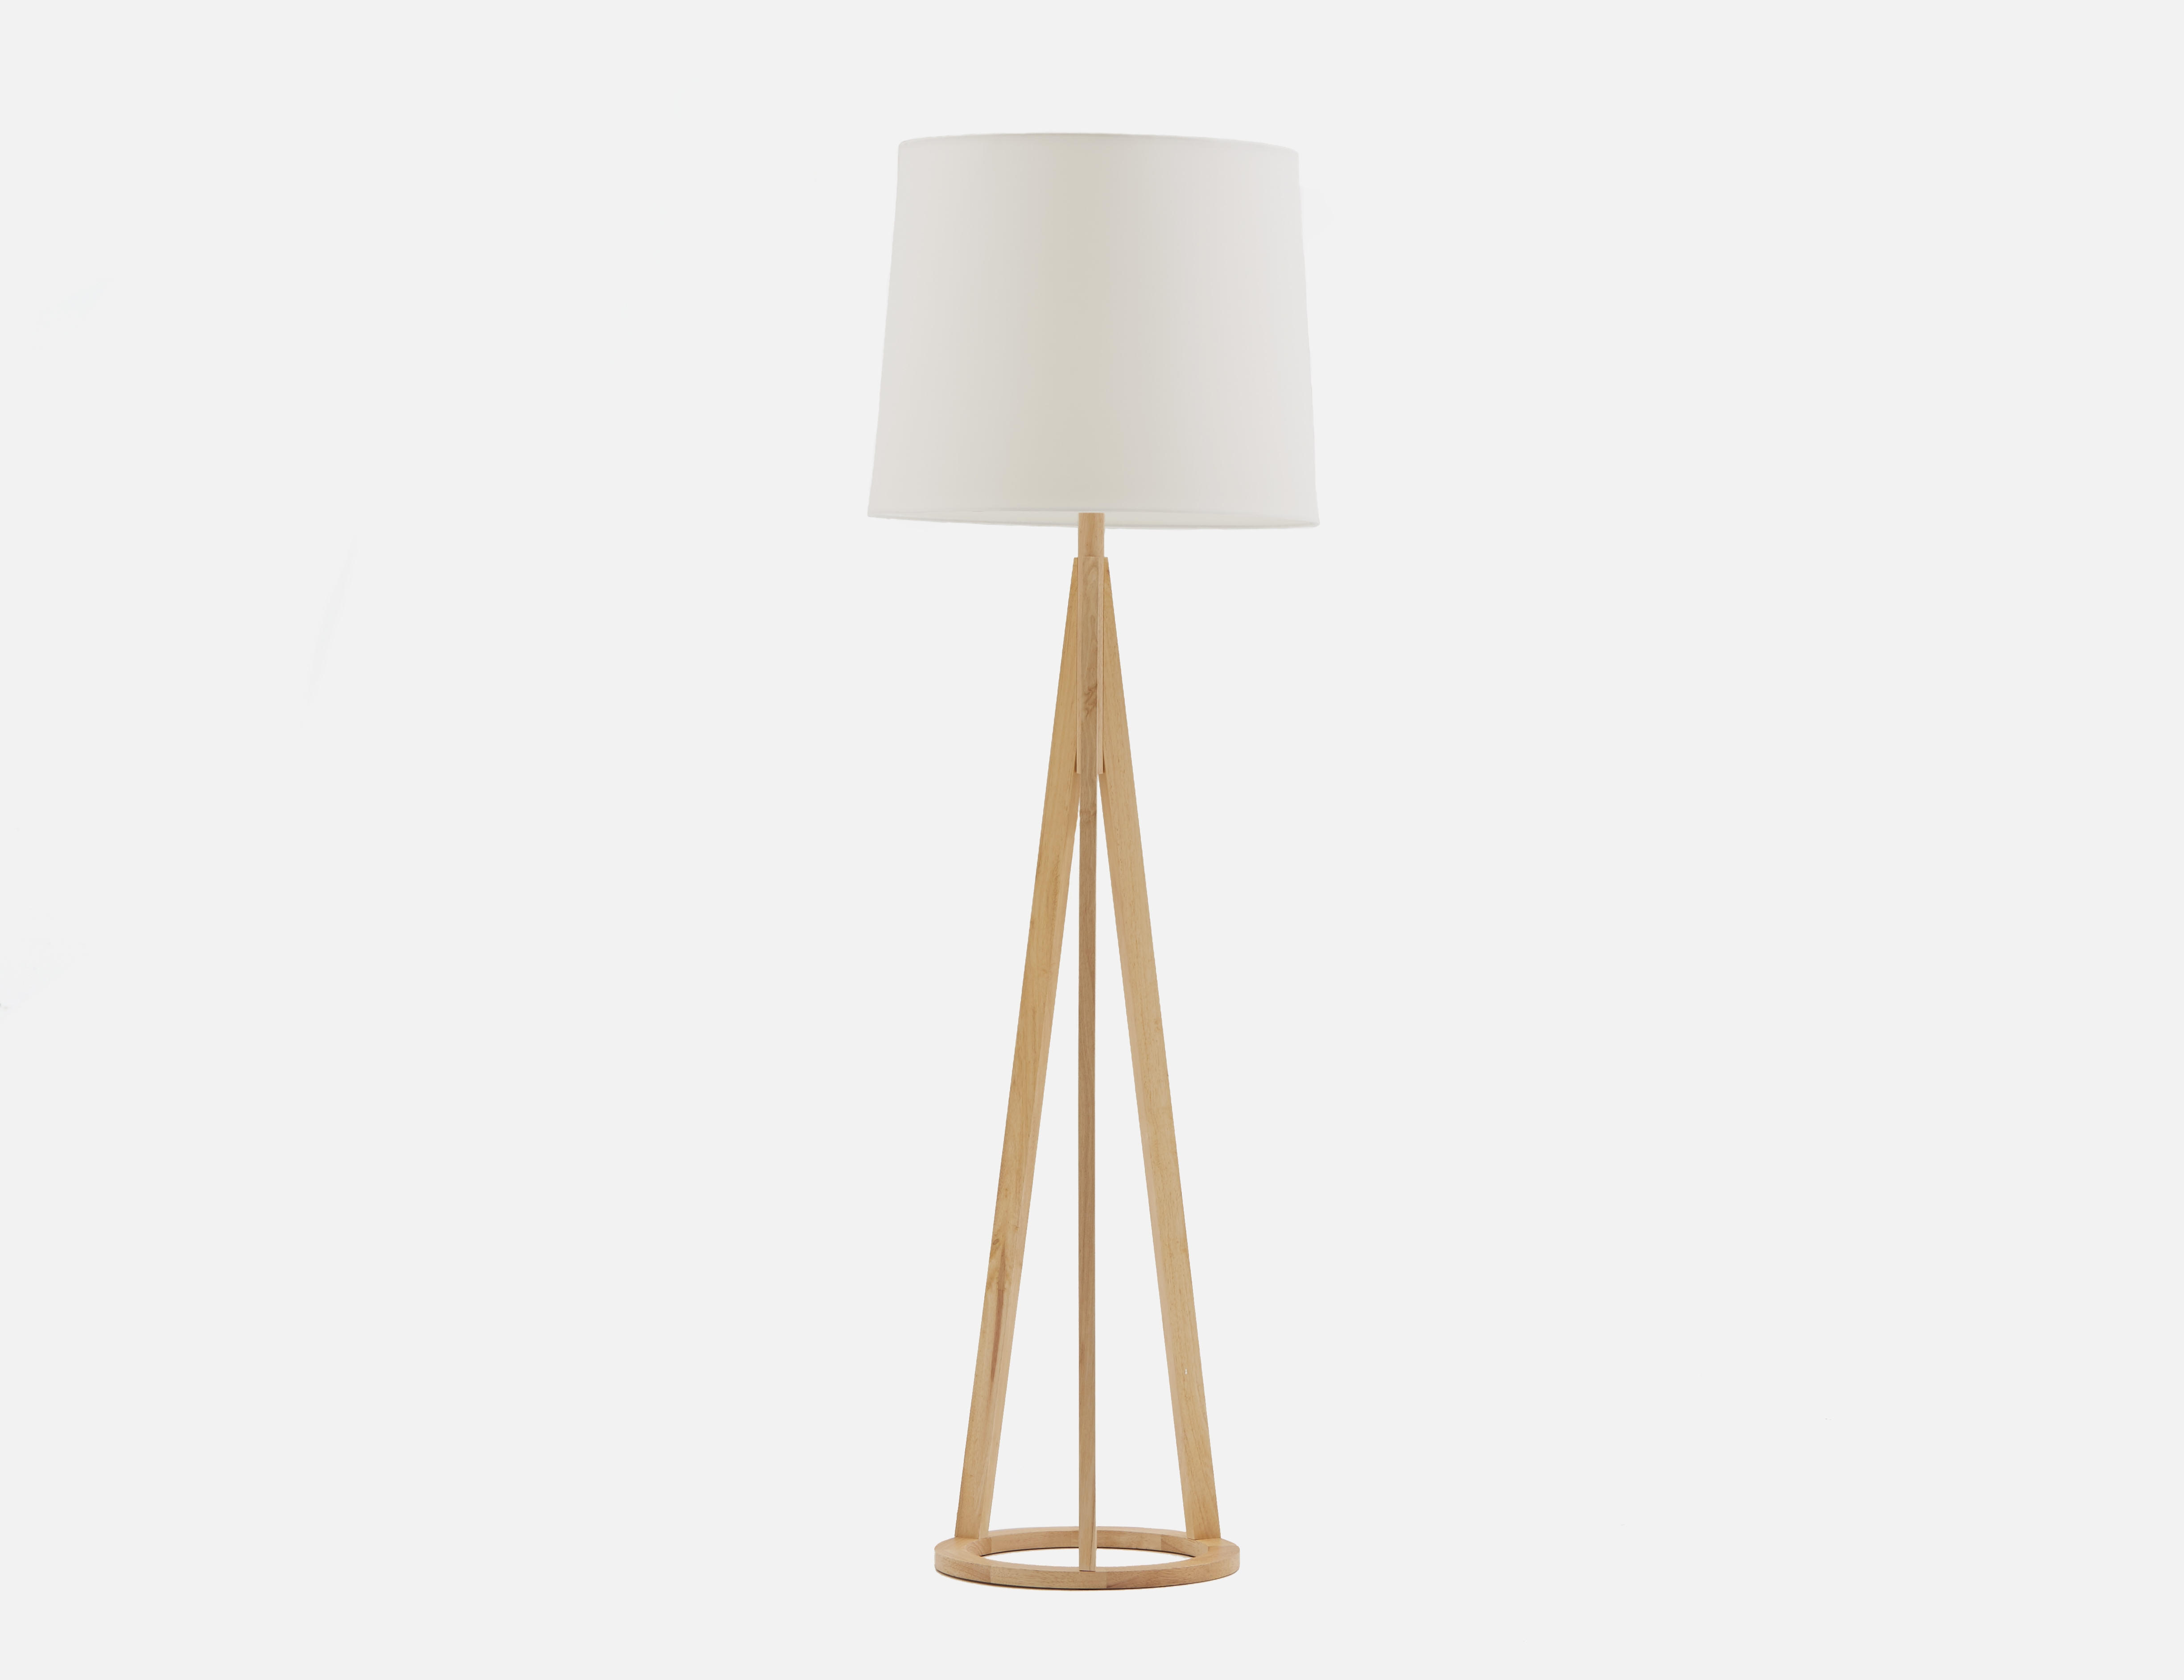 Bimini White And Natural Floor Lamp 160cm Height Structu pertaining to size 4897 X 3767